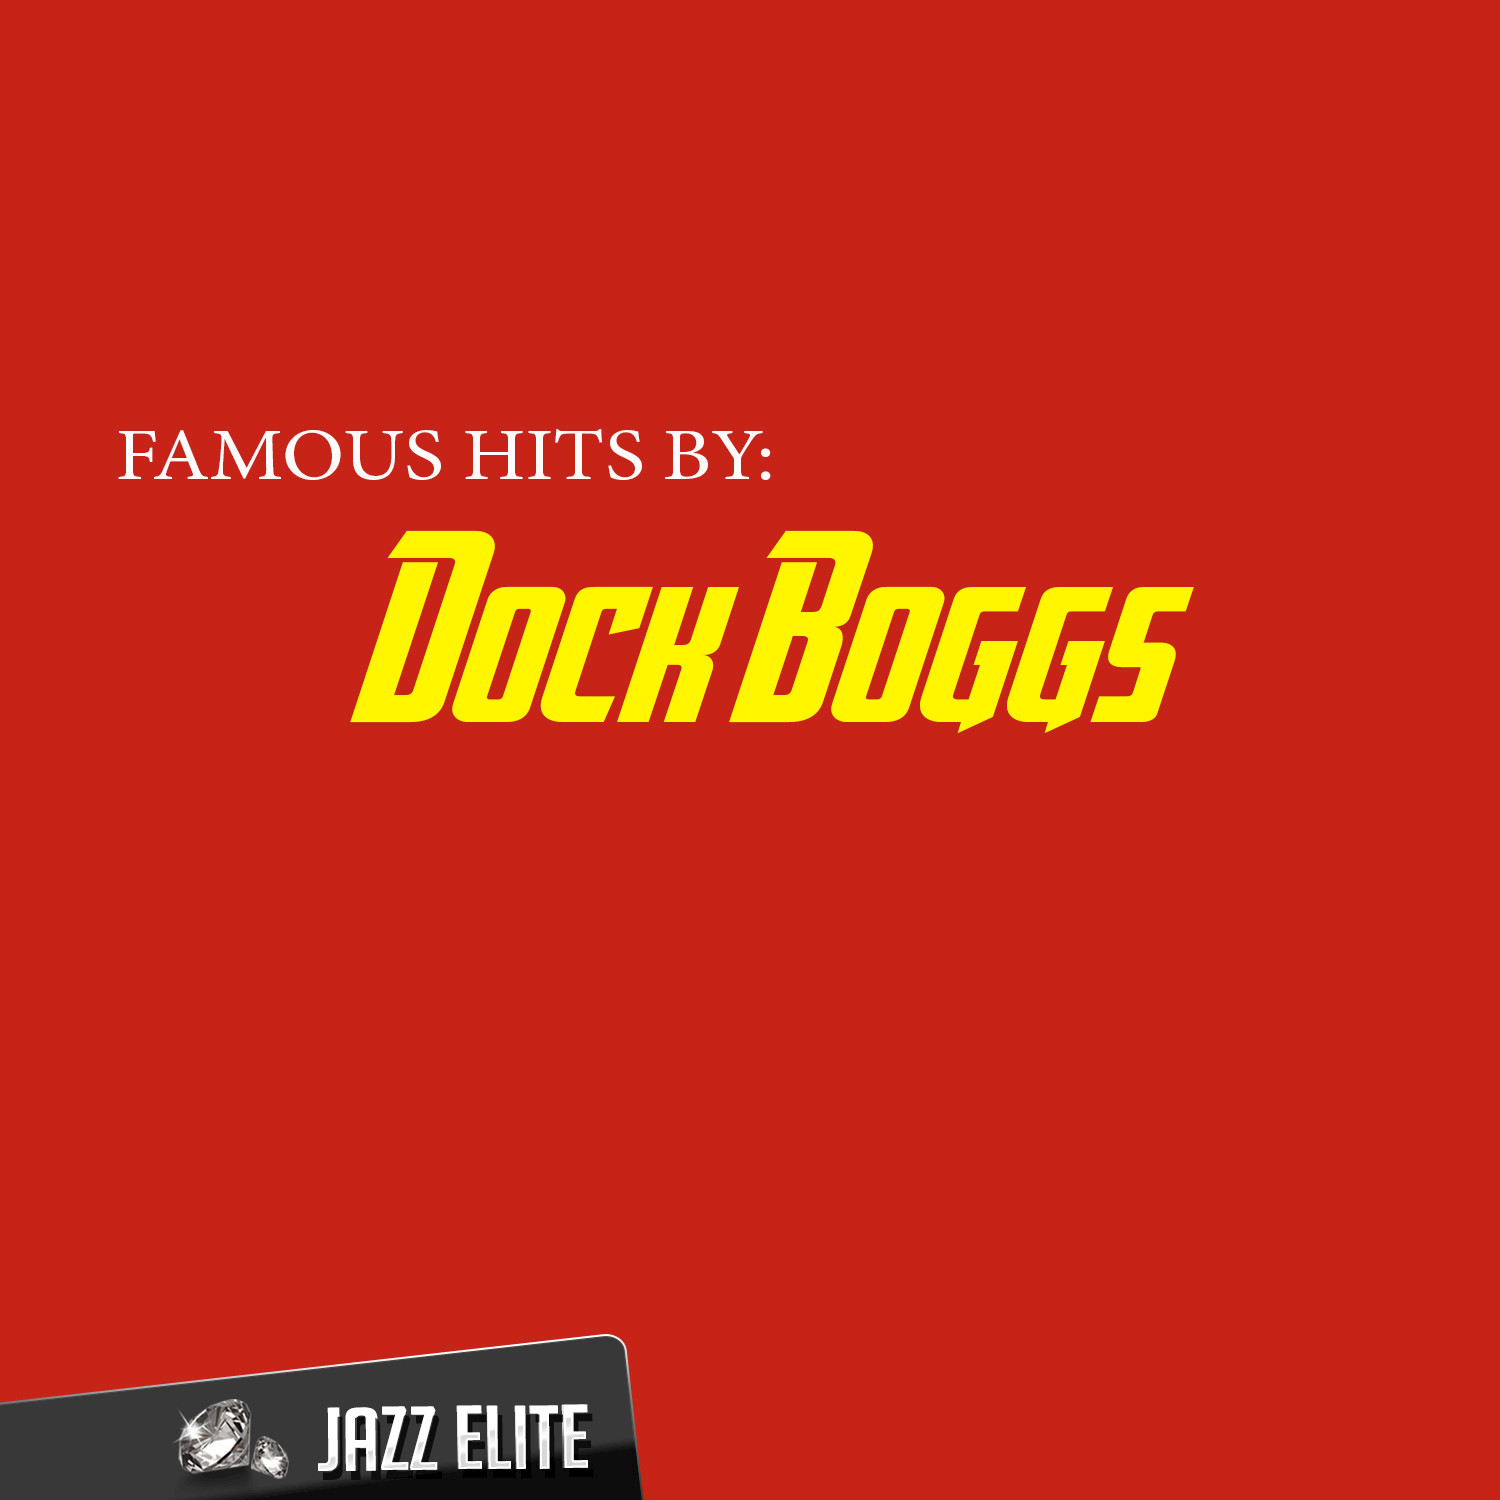 Famous Hits by Dock Boggs